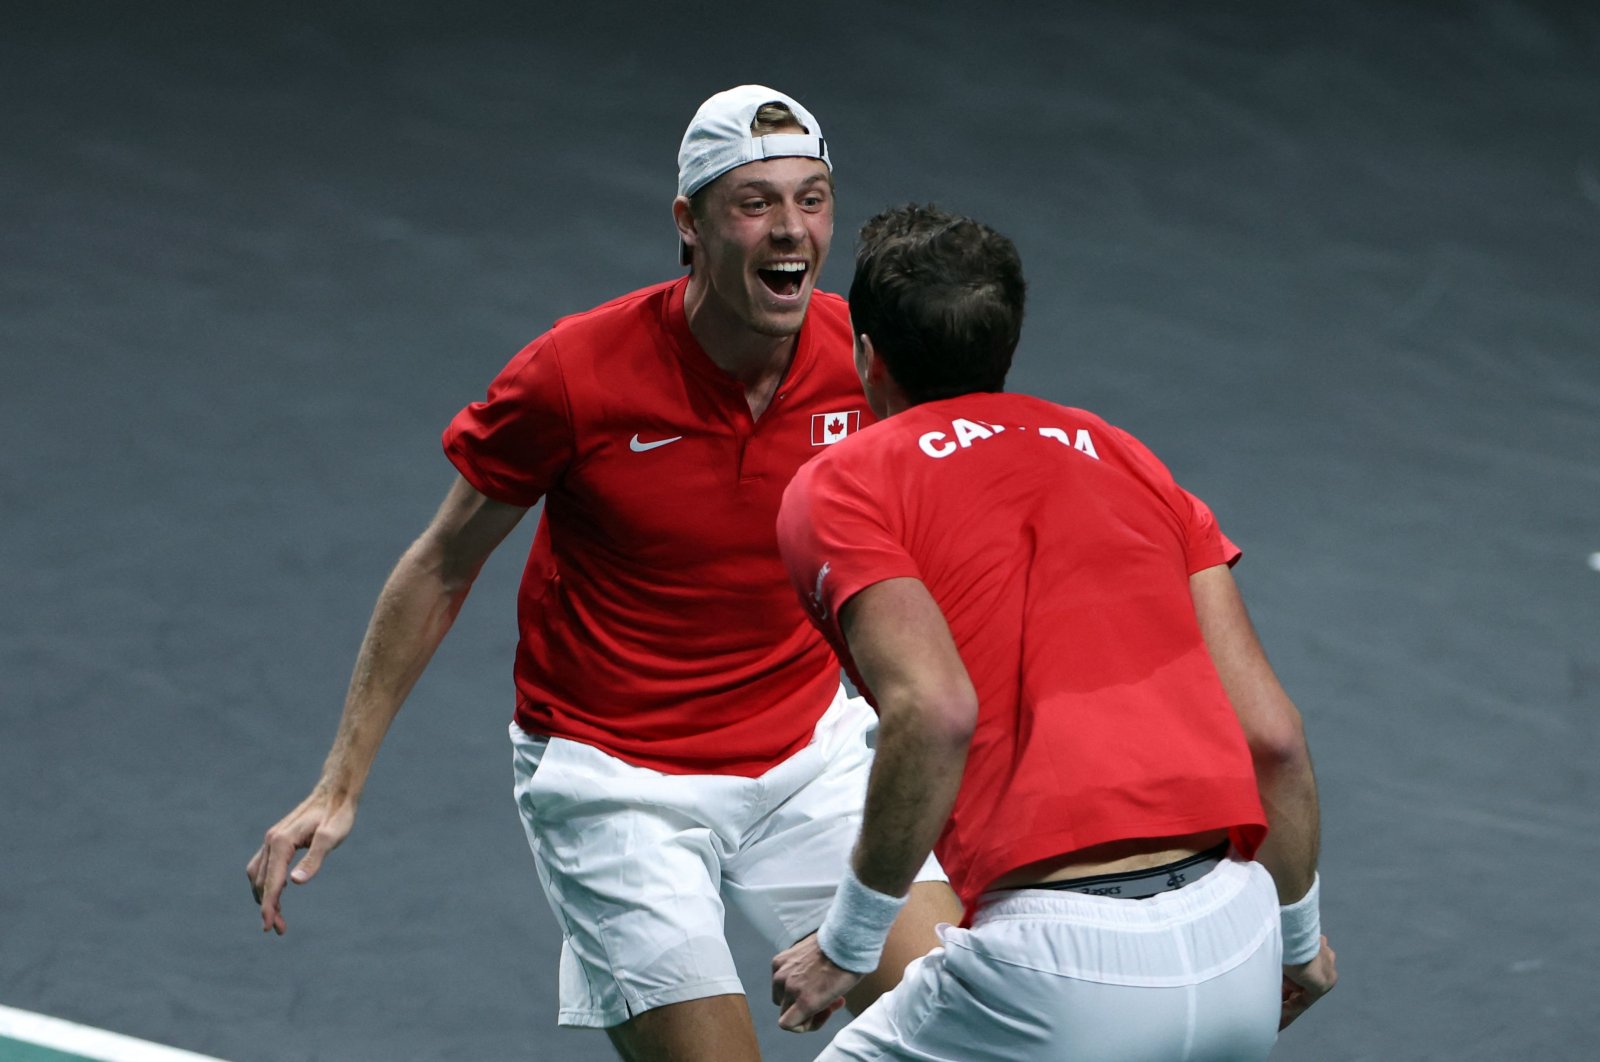 Canada&#039;s Denis Shapovalov and Vasek Pospisil celebrate after winning the men&#039;s double quarterfinal tennis match between Germany and Canada of the Davis Cup tennis tournament at the Martin Carpena sports hall, Malaga, Spain, Nov. 24, 2022. (AFP Photo)